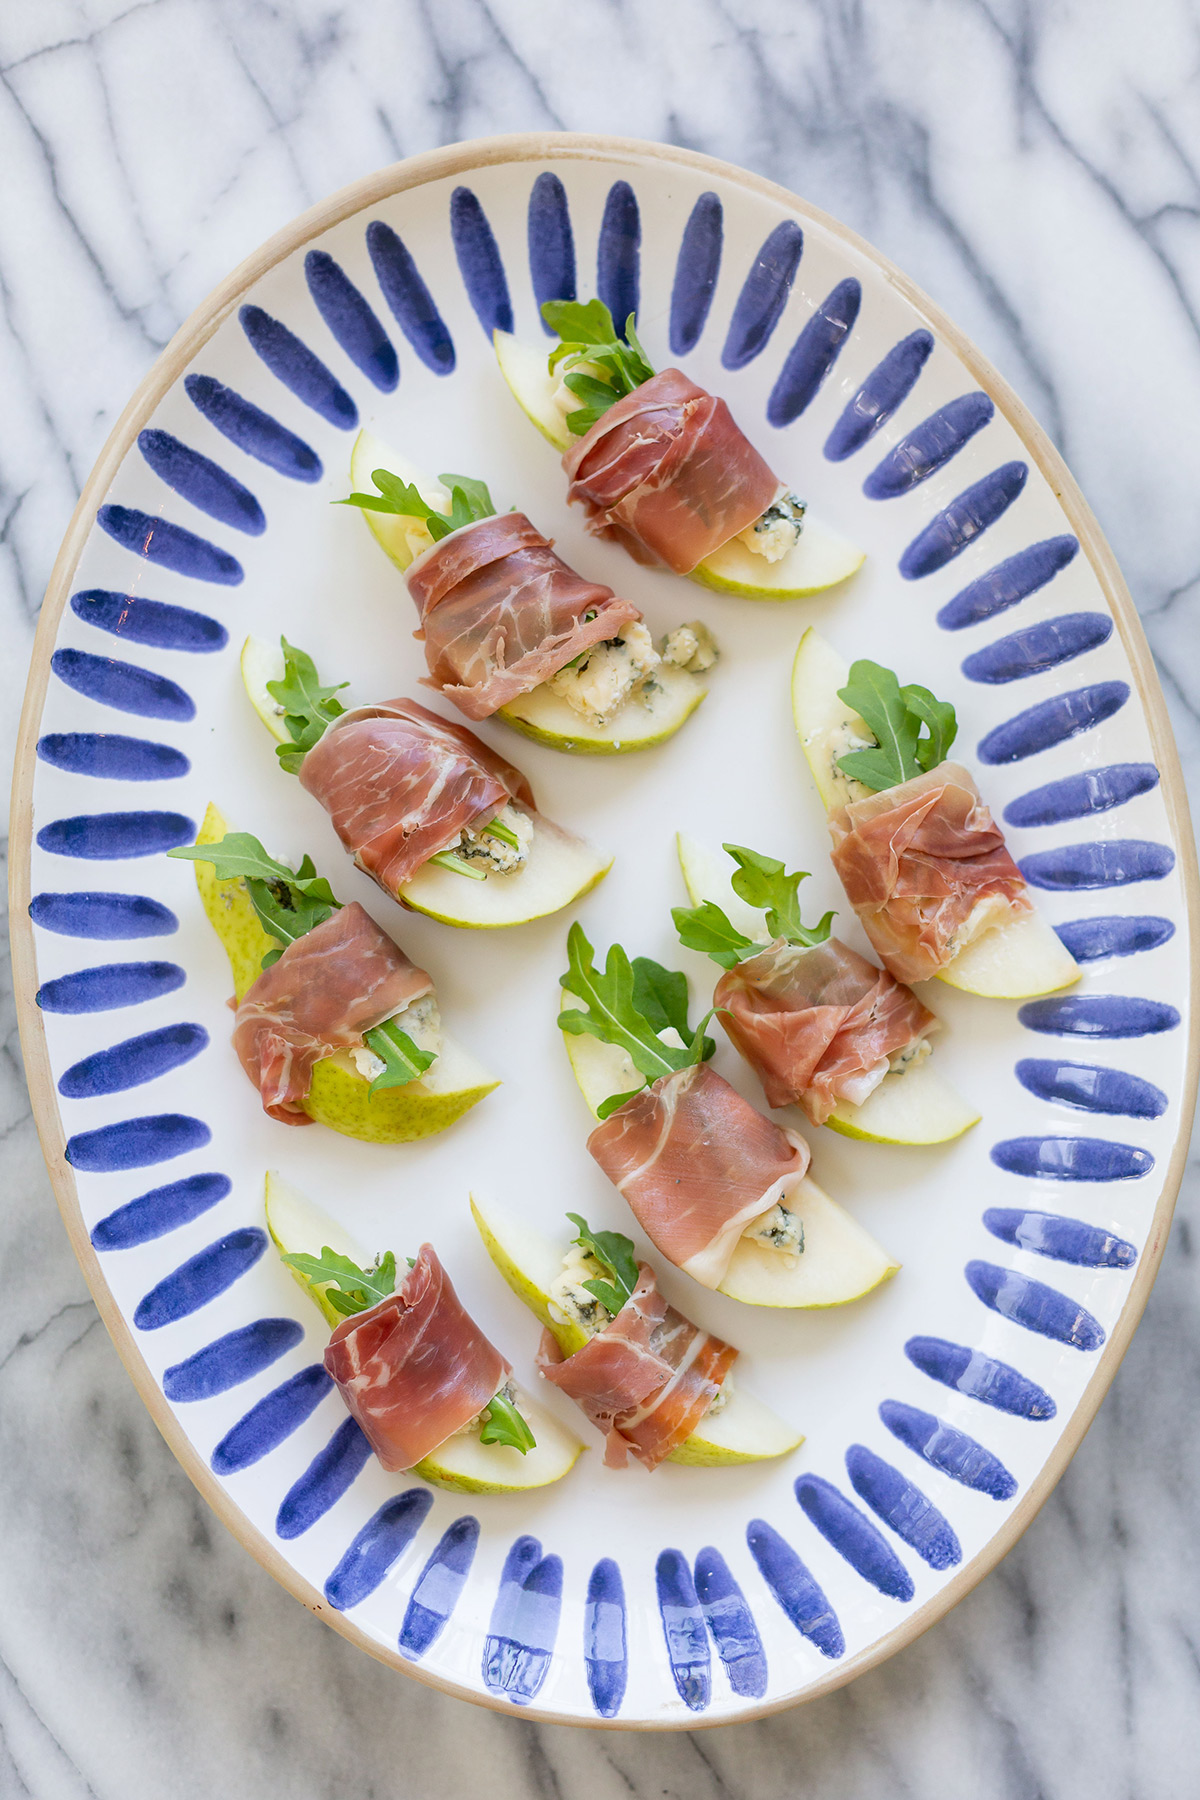 Pear Appetizer with Prosciutto, Blue Cheese and Arugula